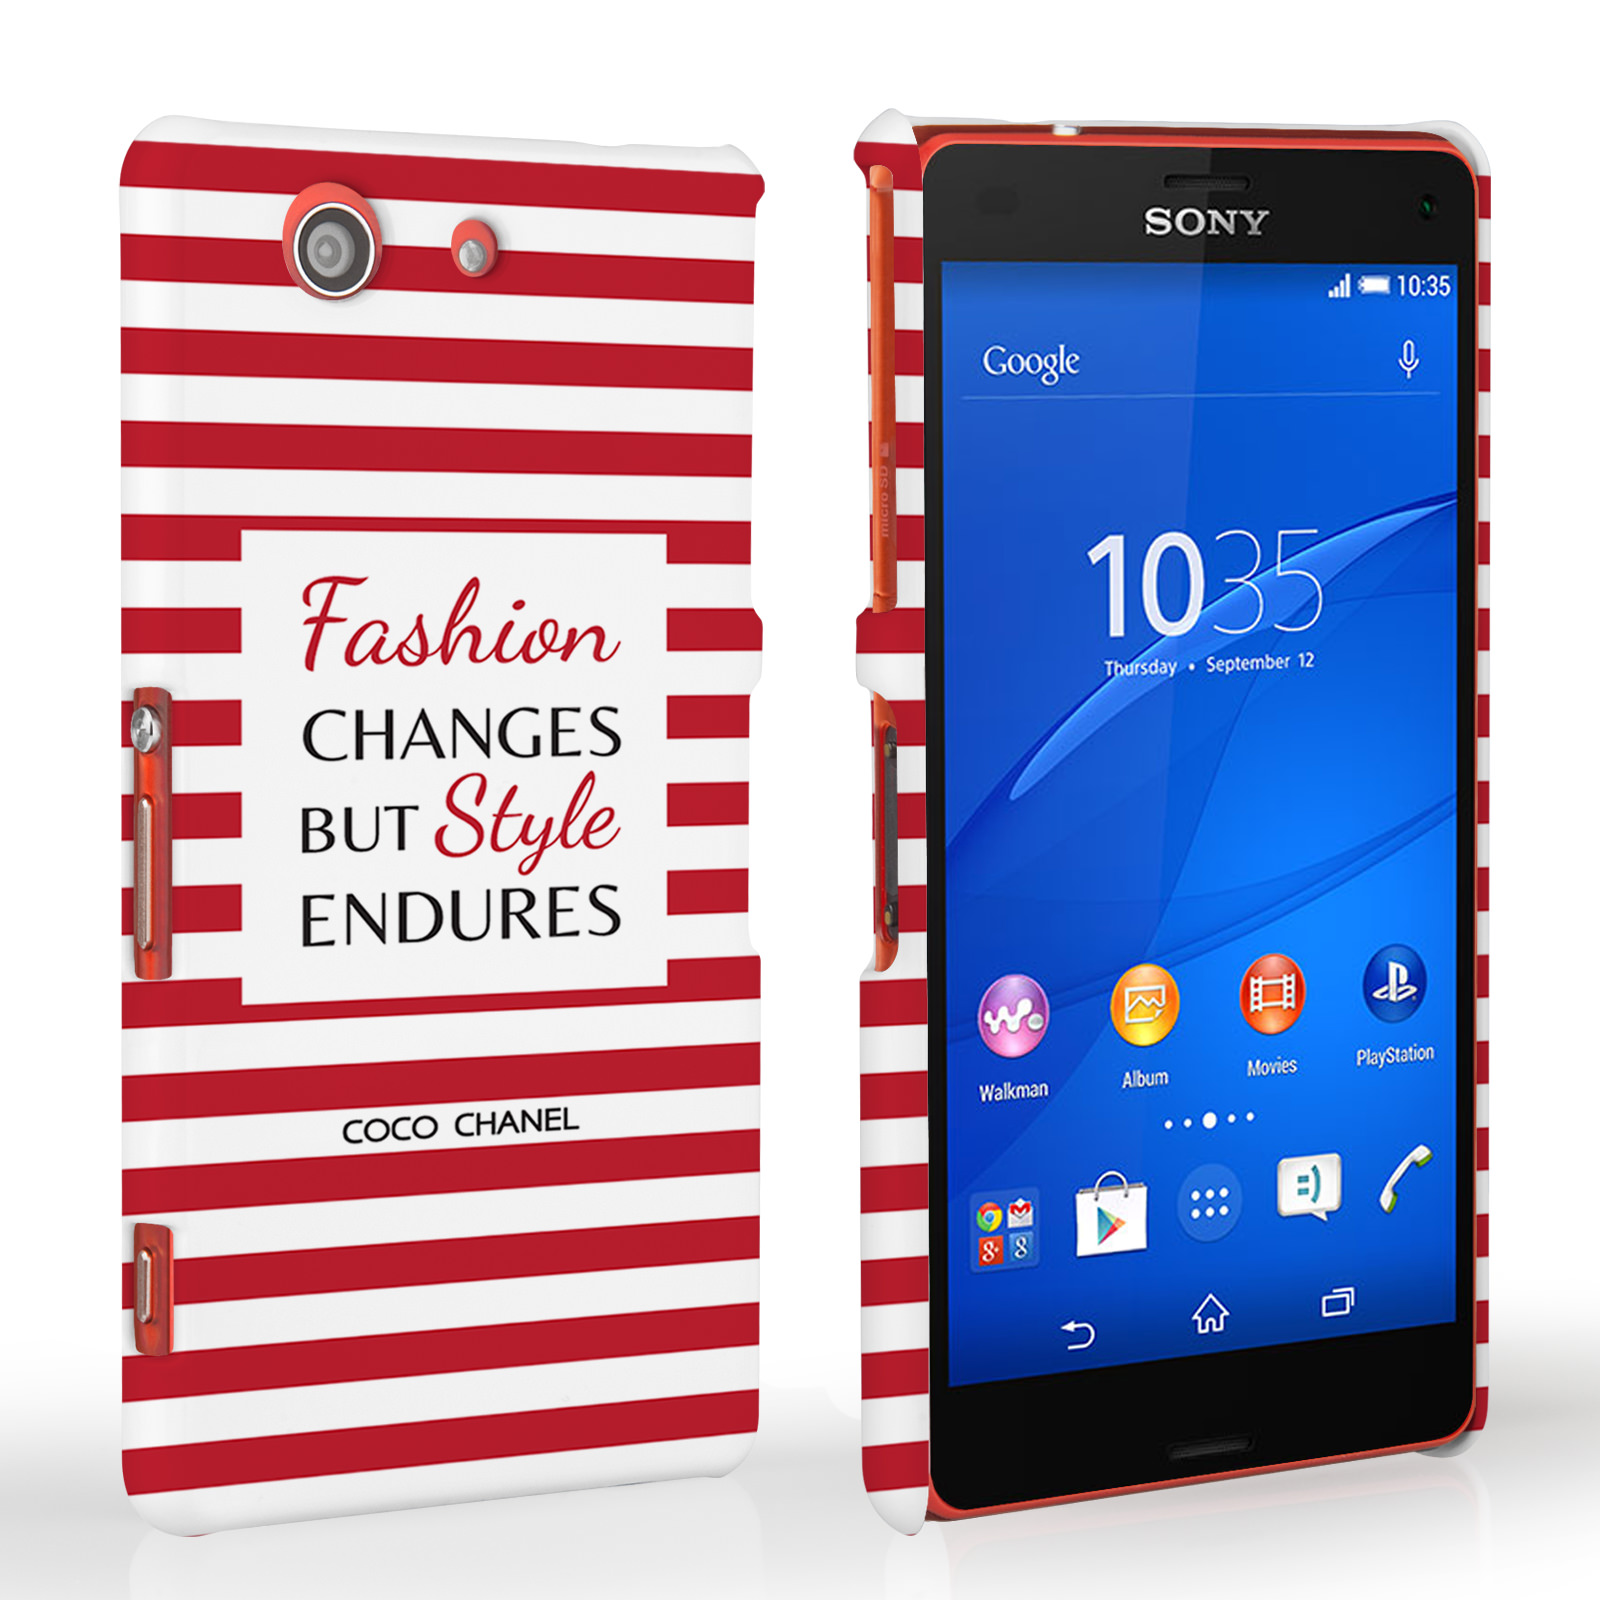 Caseflex Sony Xperia Z3 Compact Chanel ‘Fashion Changes’ Quote Case – Red and White